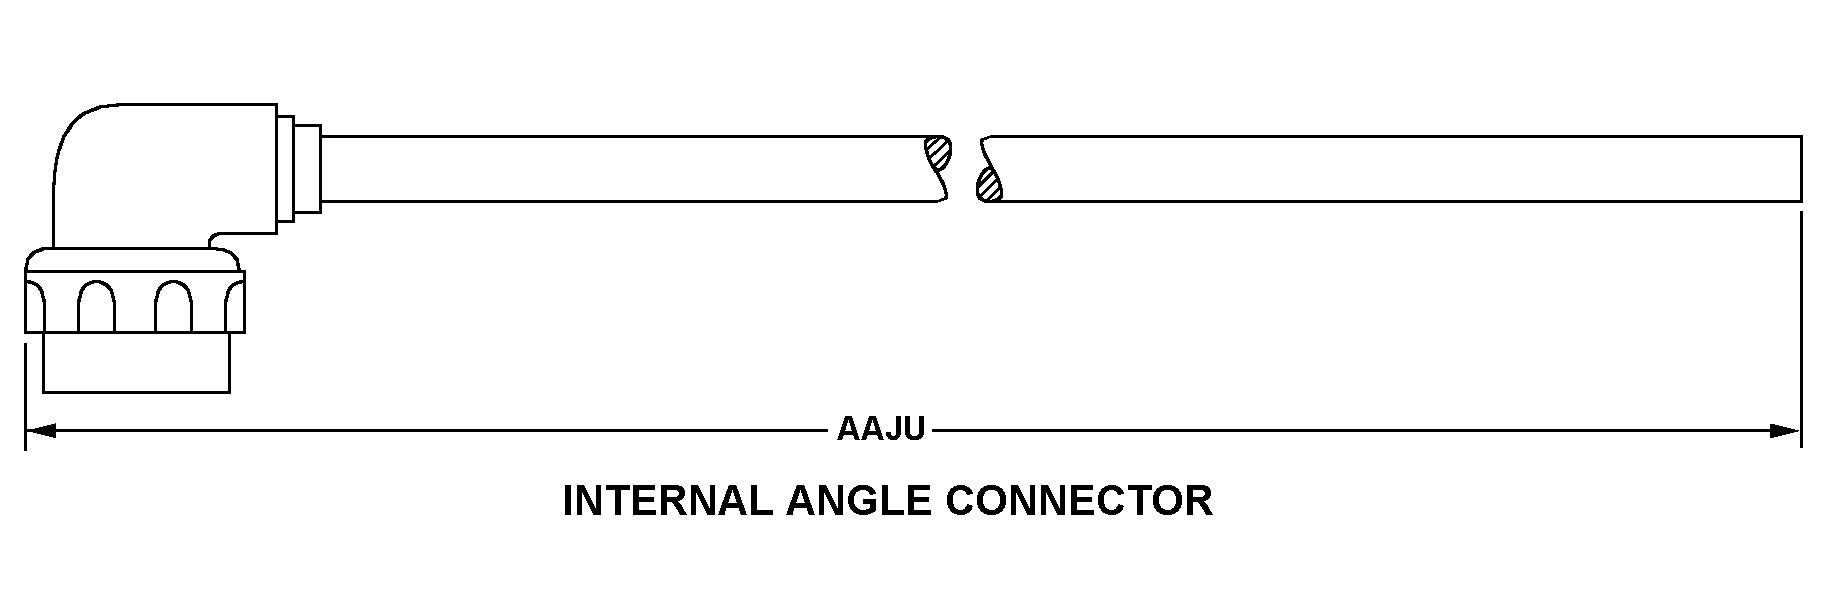 INTERNAL ANGLE CONNECTOR style nsn 6150-01-219-7740